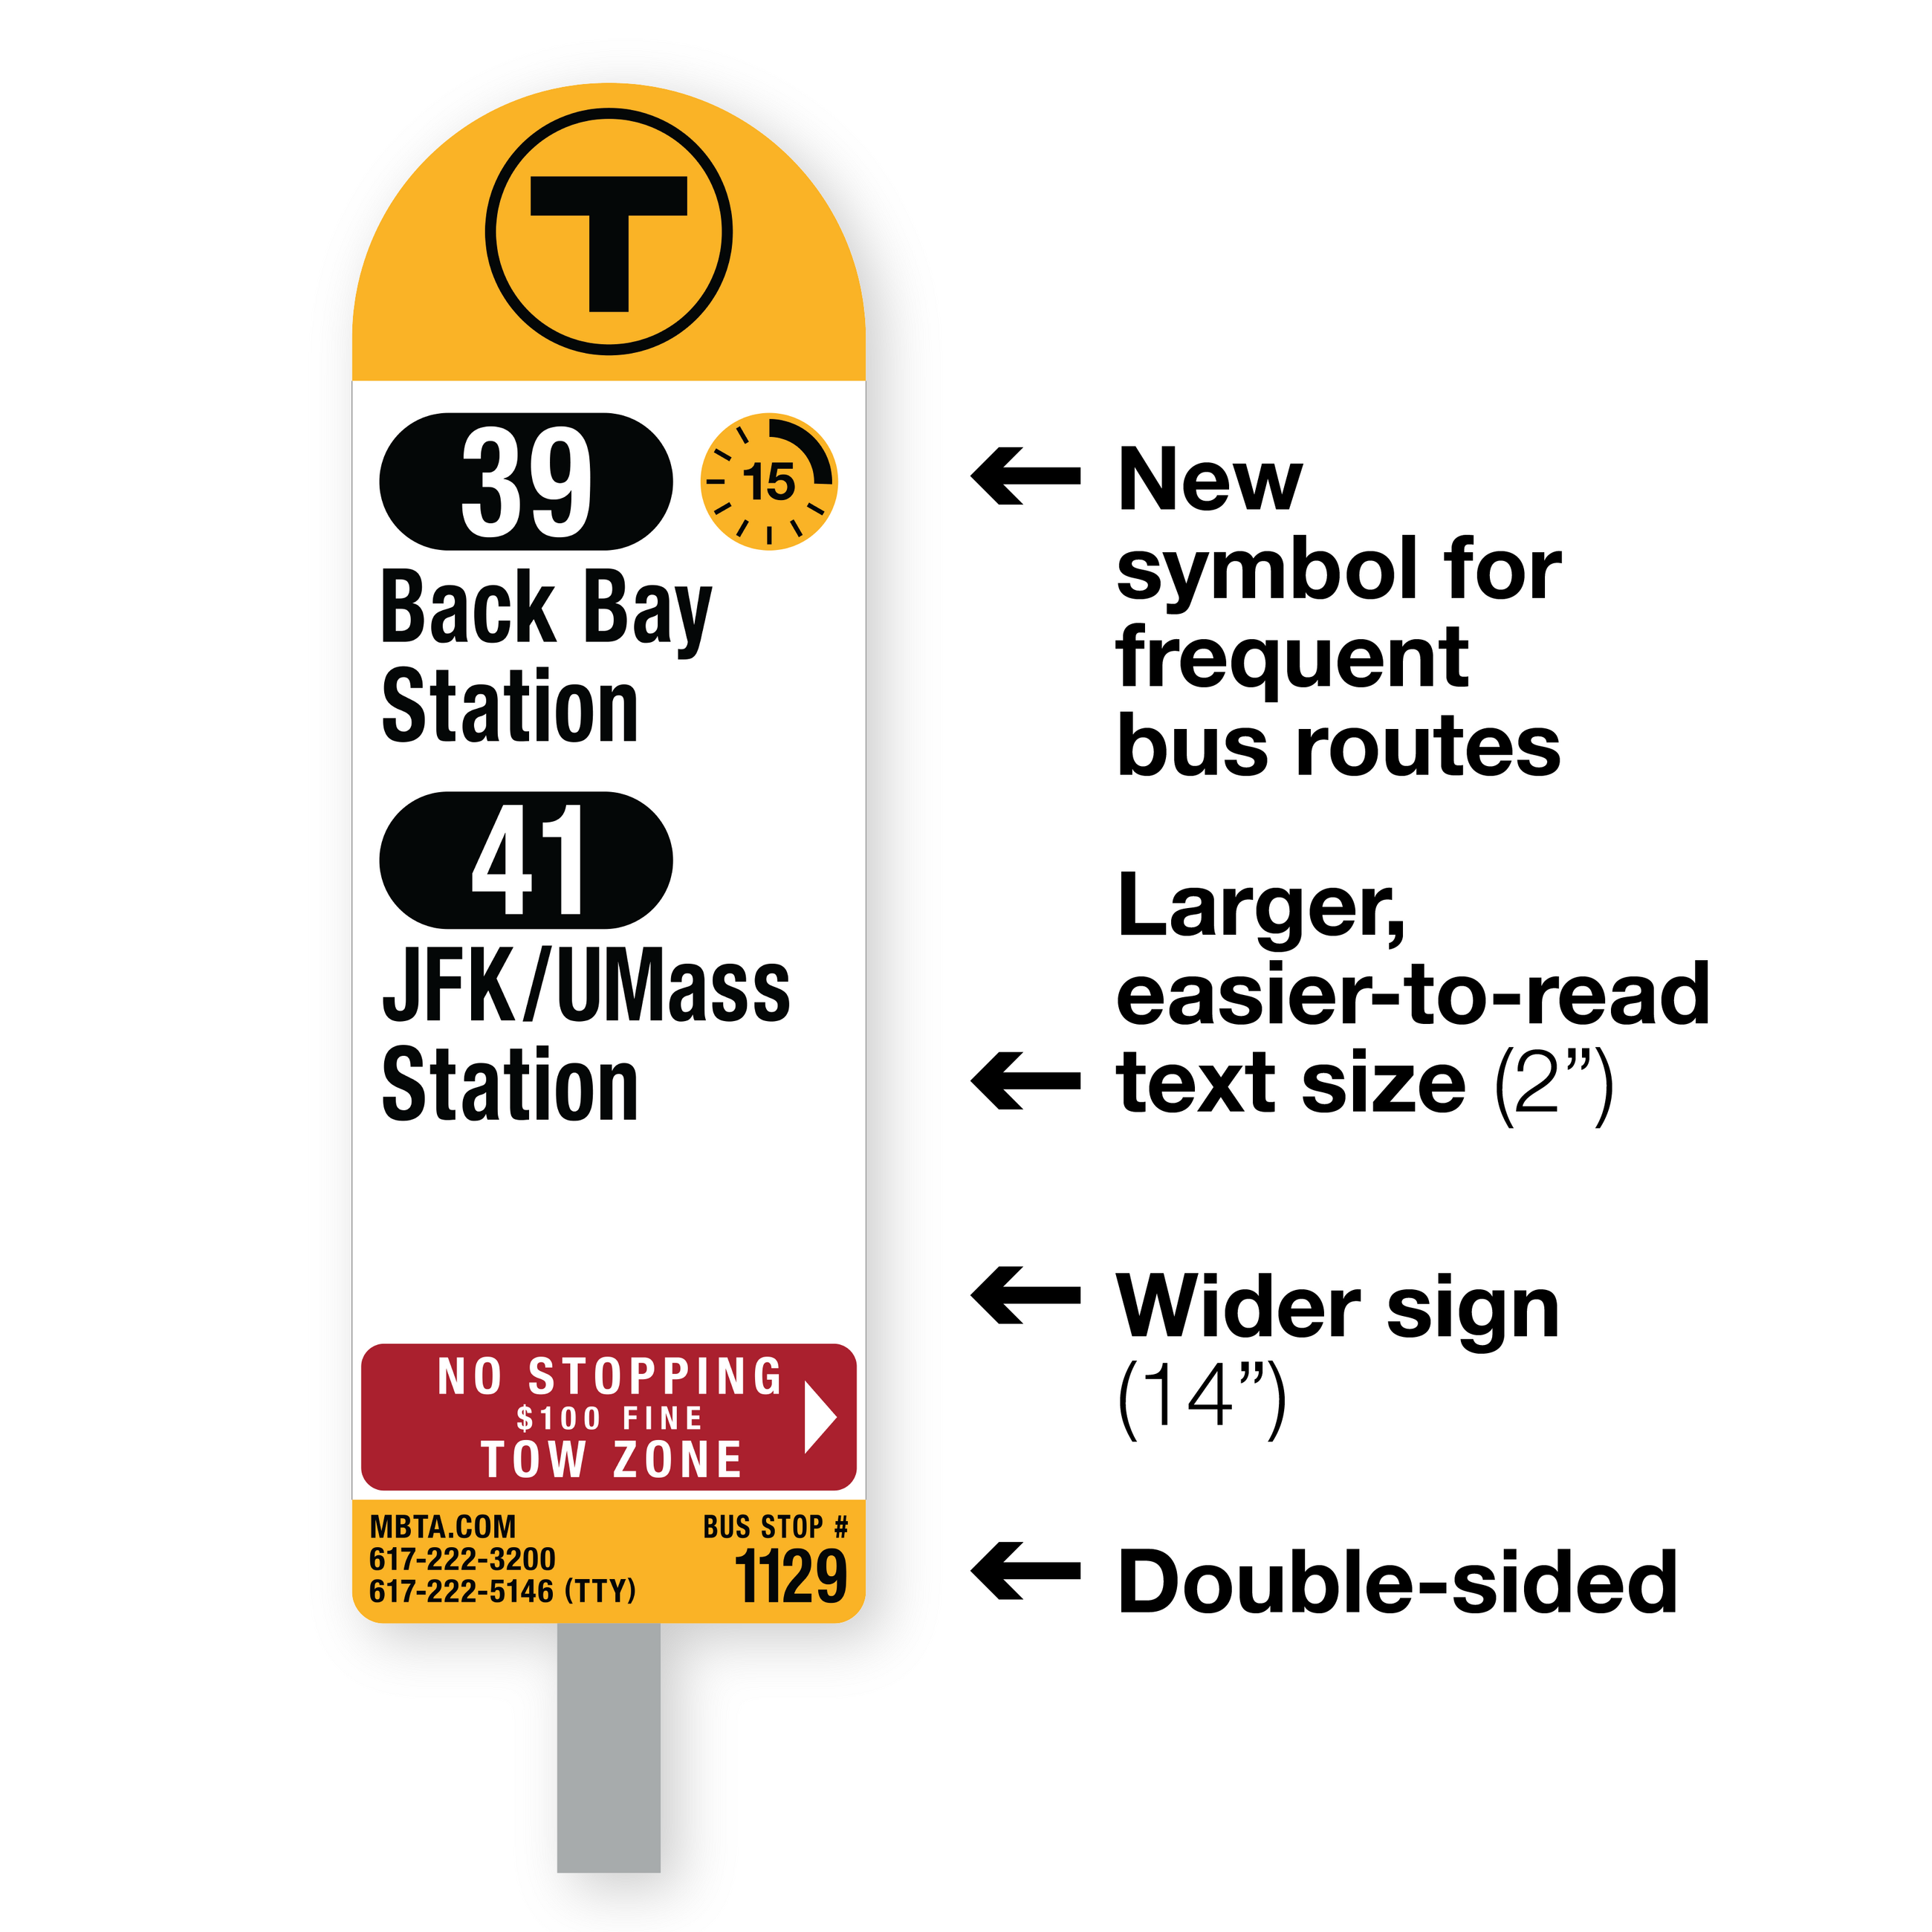 Image showing new changes to bus stop signs